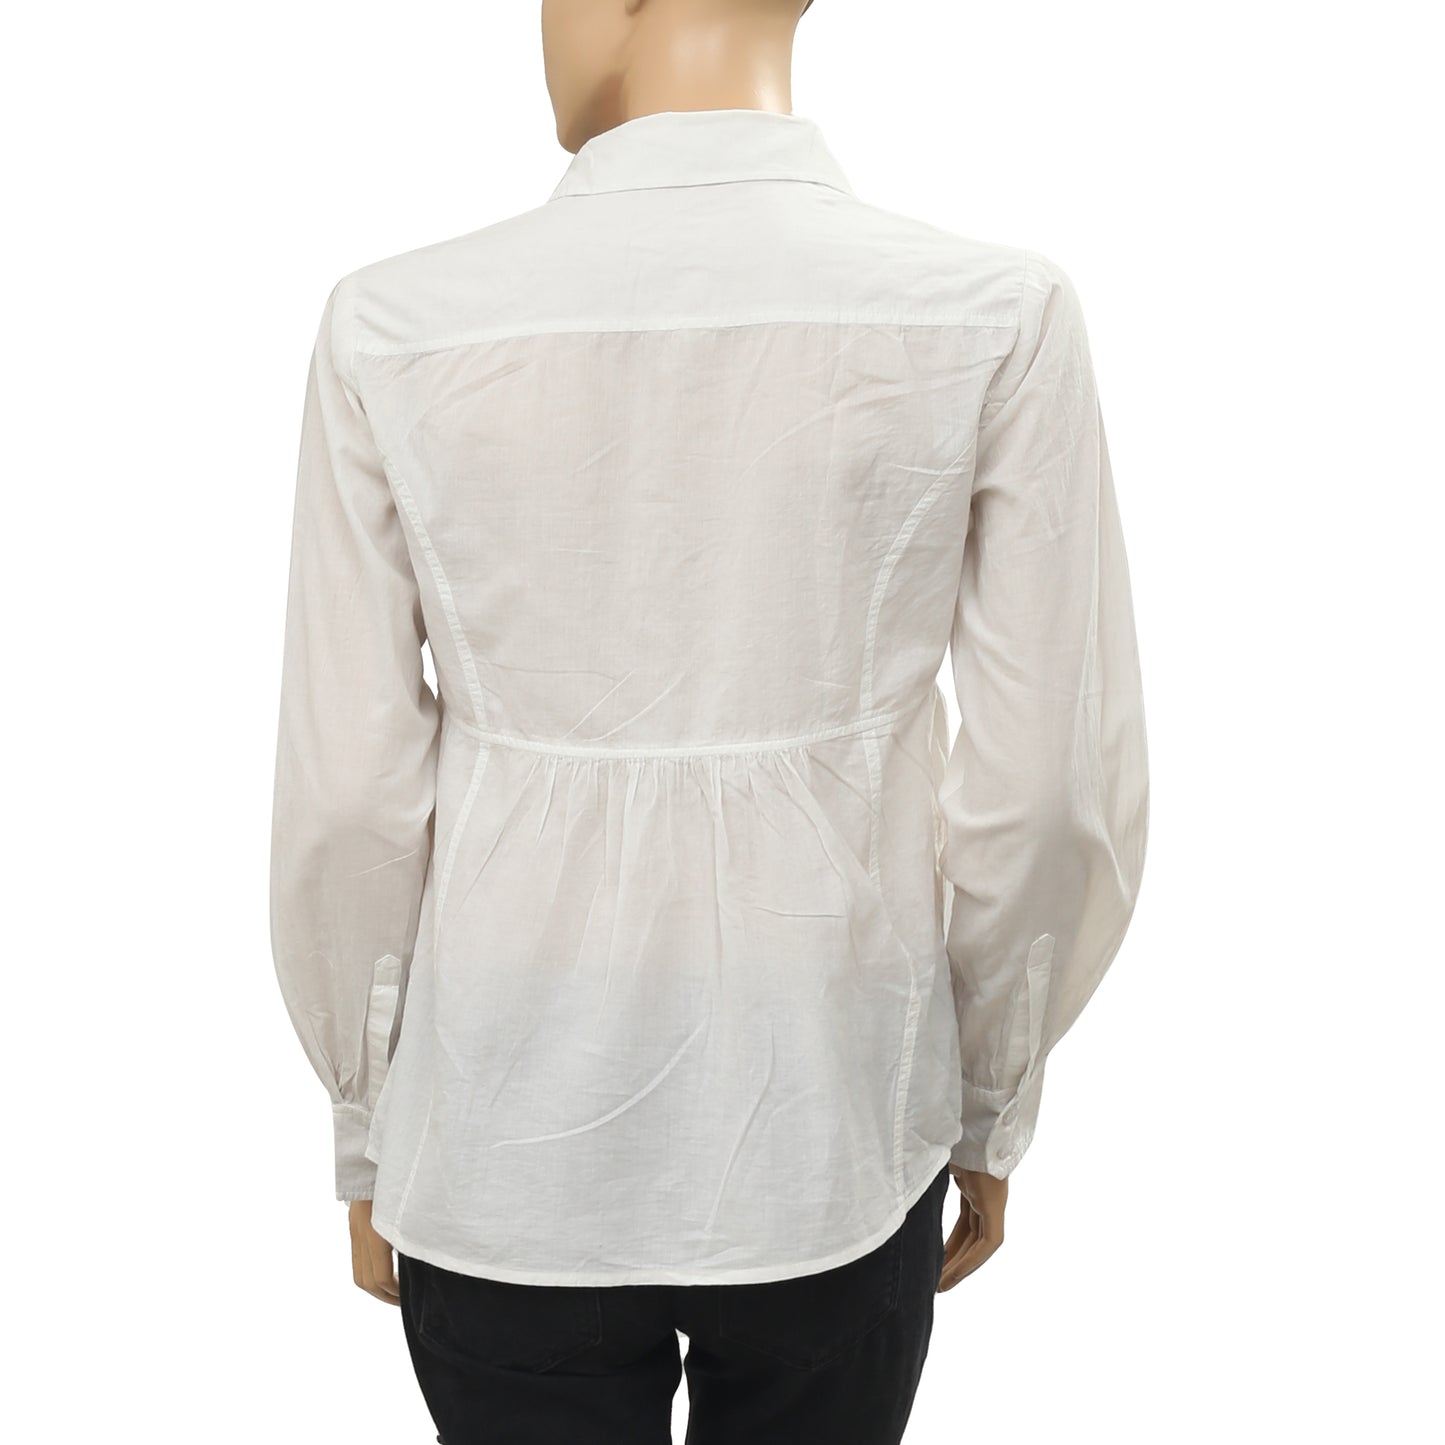 Anthropologie Ruffle Solid Blouse Shirt Top